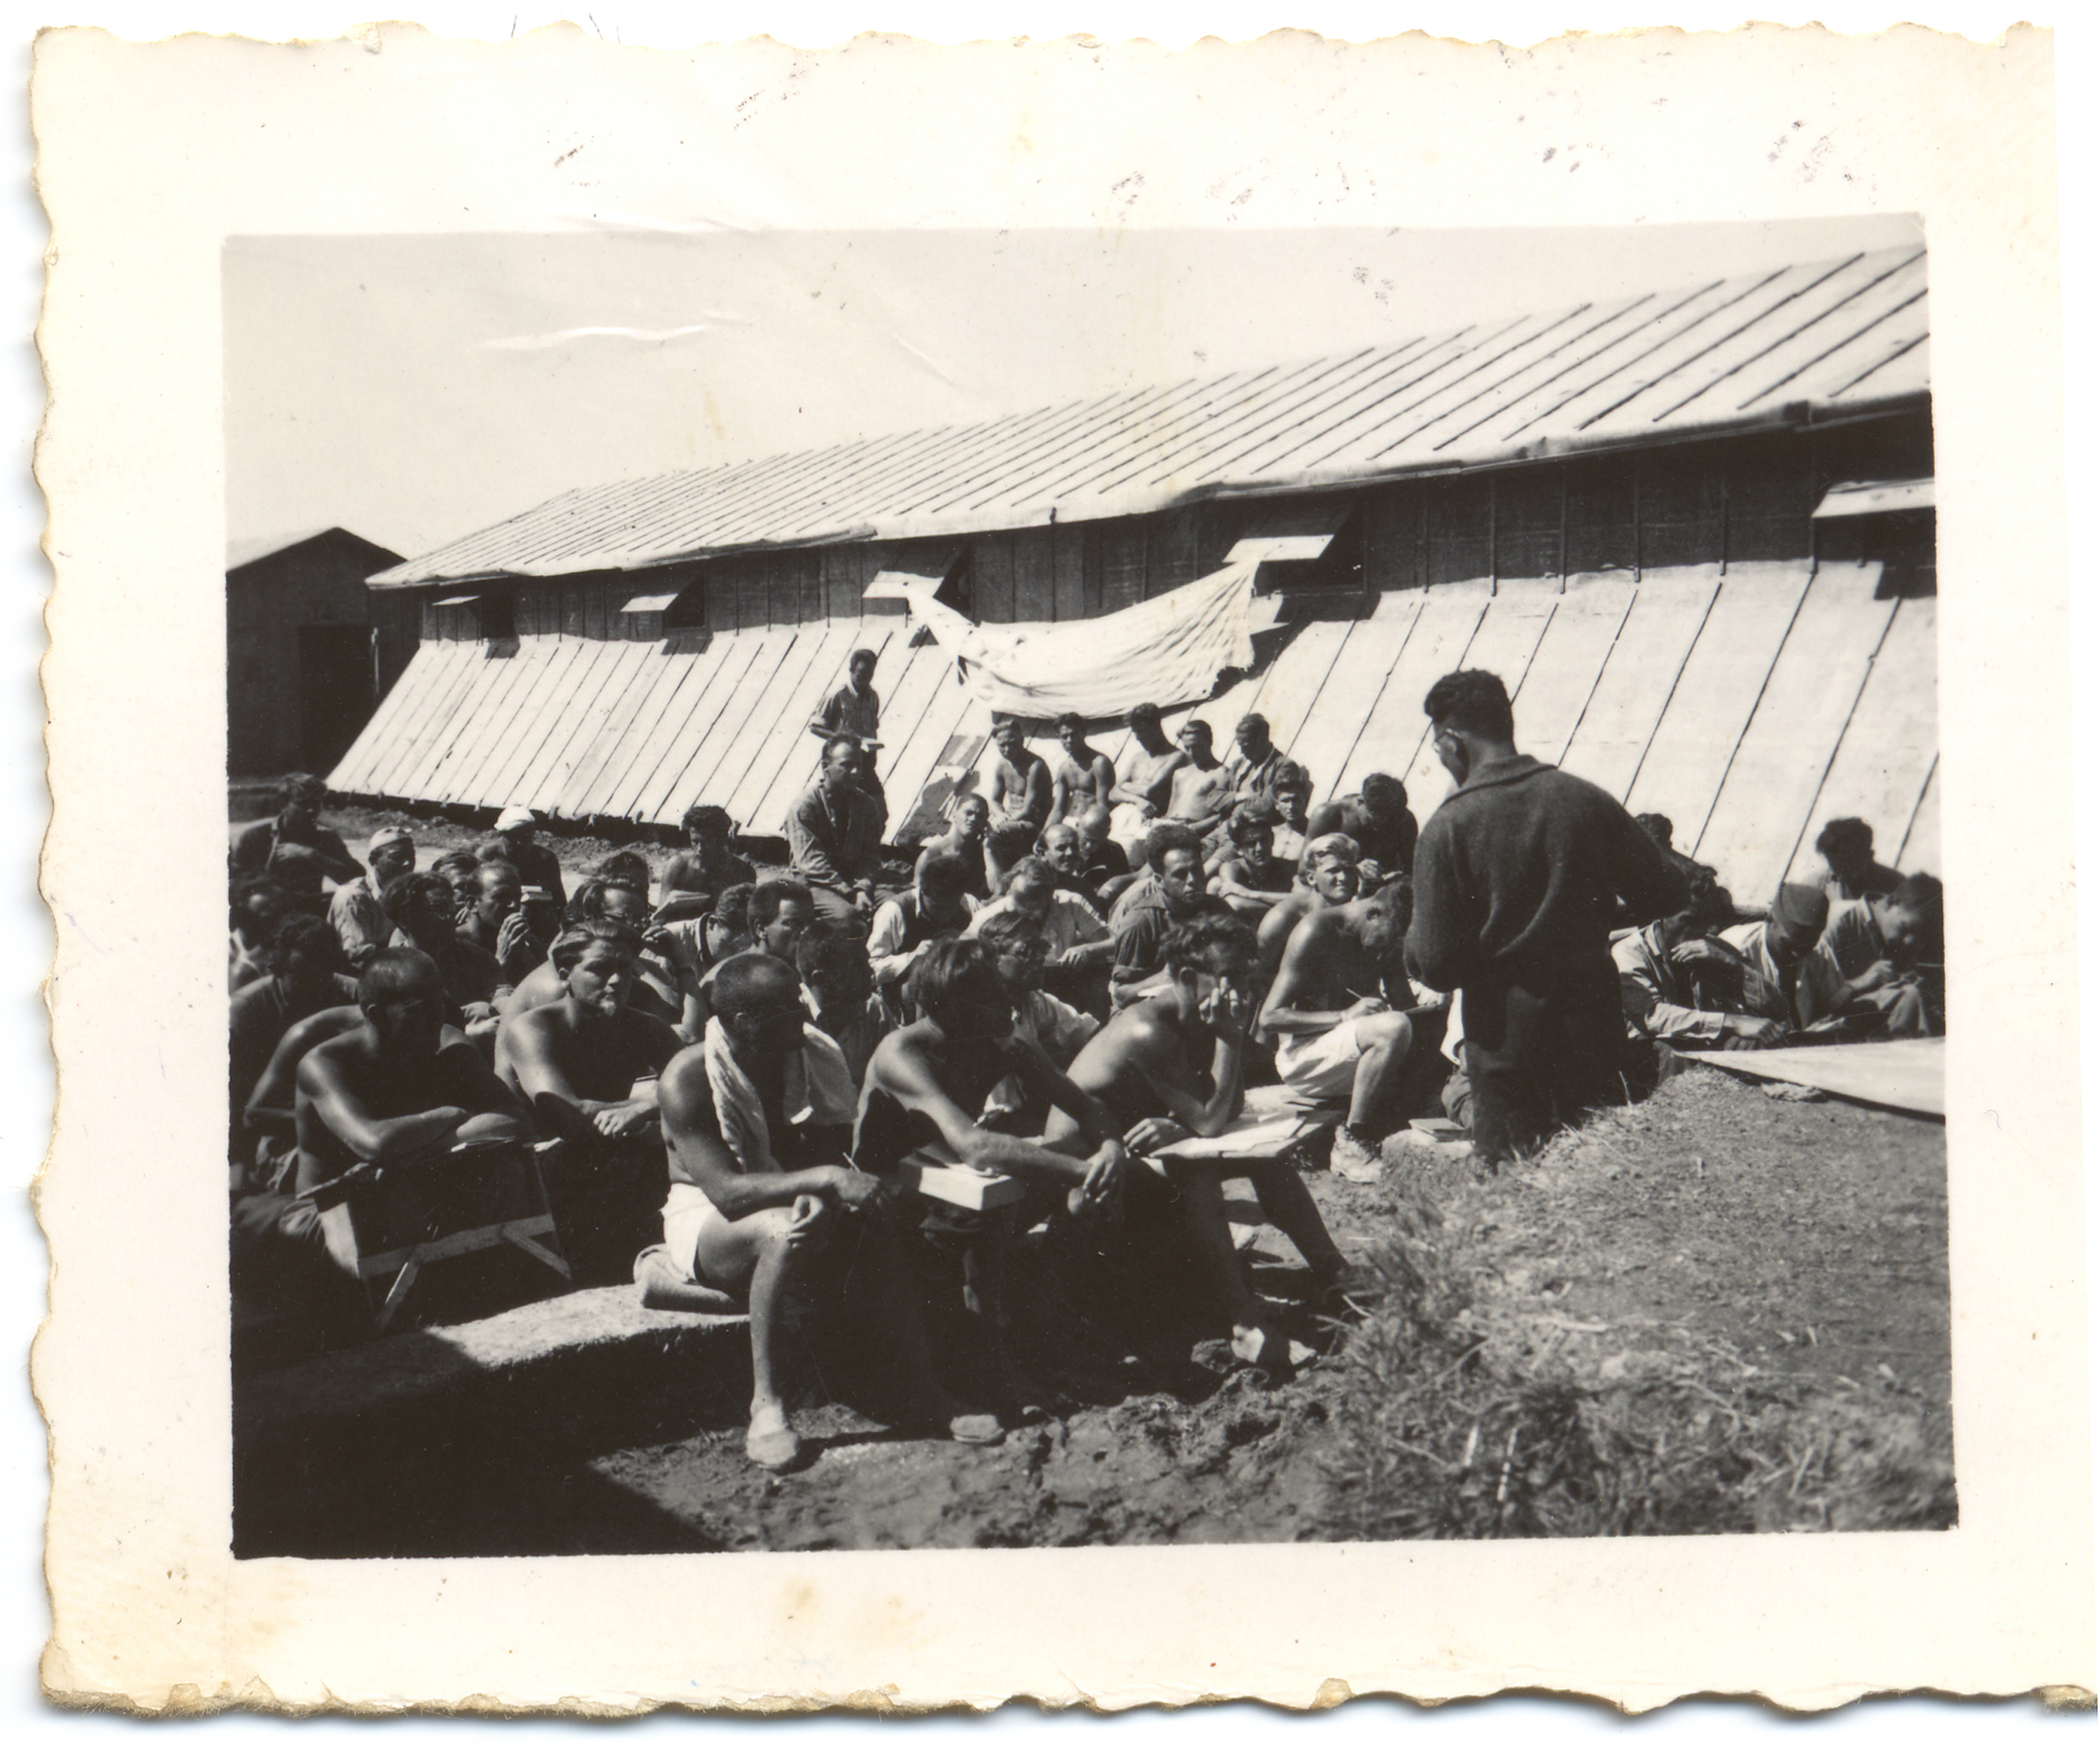 Prisoners listen to a speaker in the Gurs Internment Camp